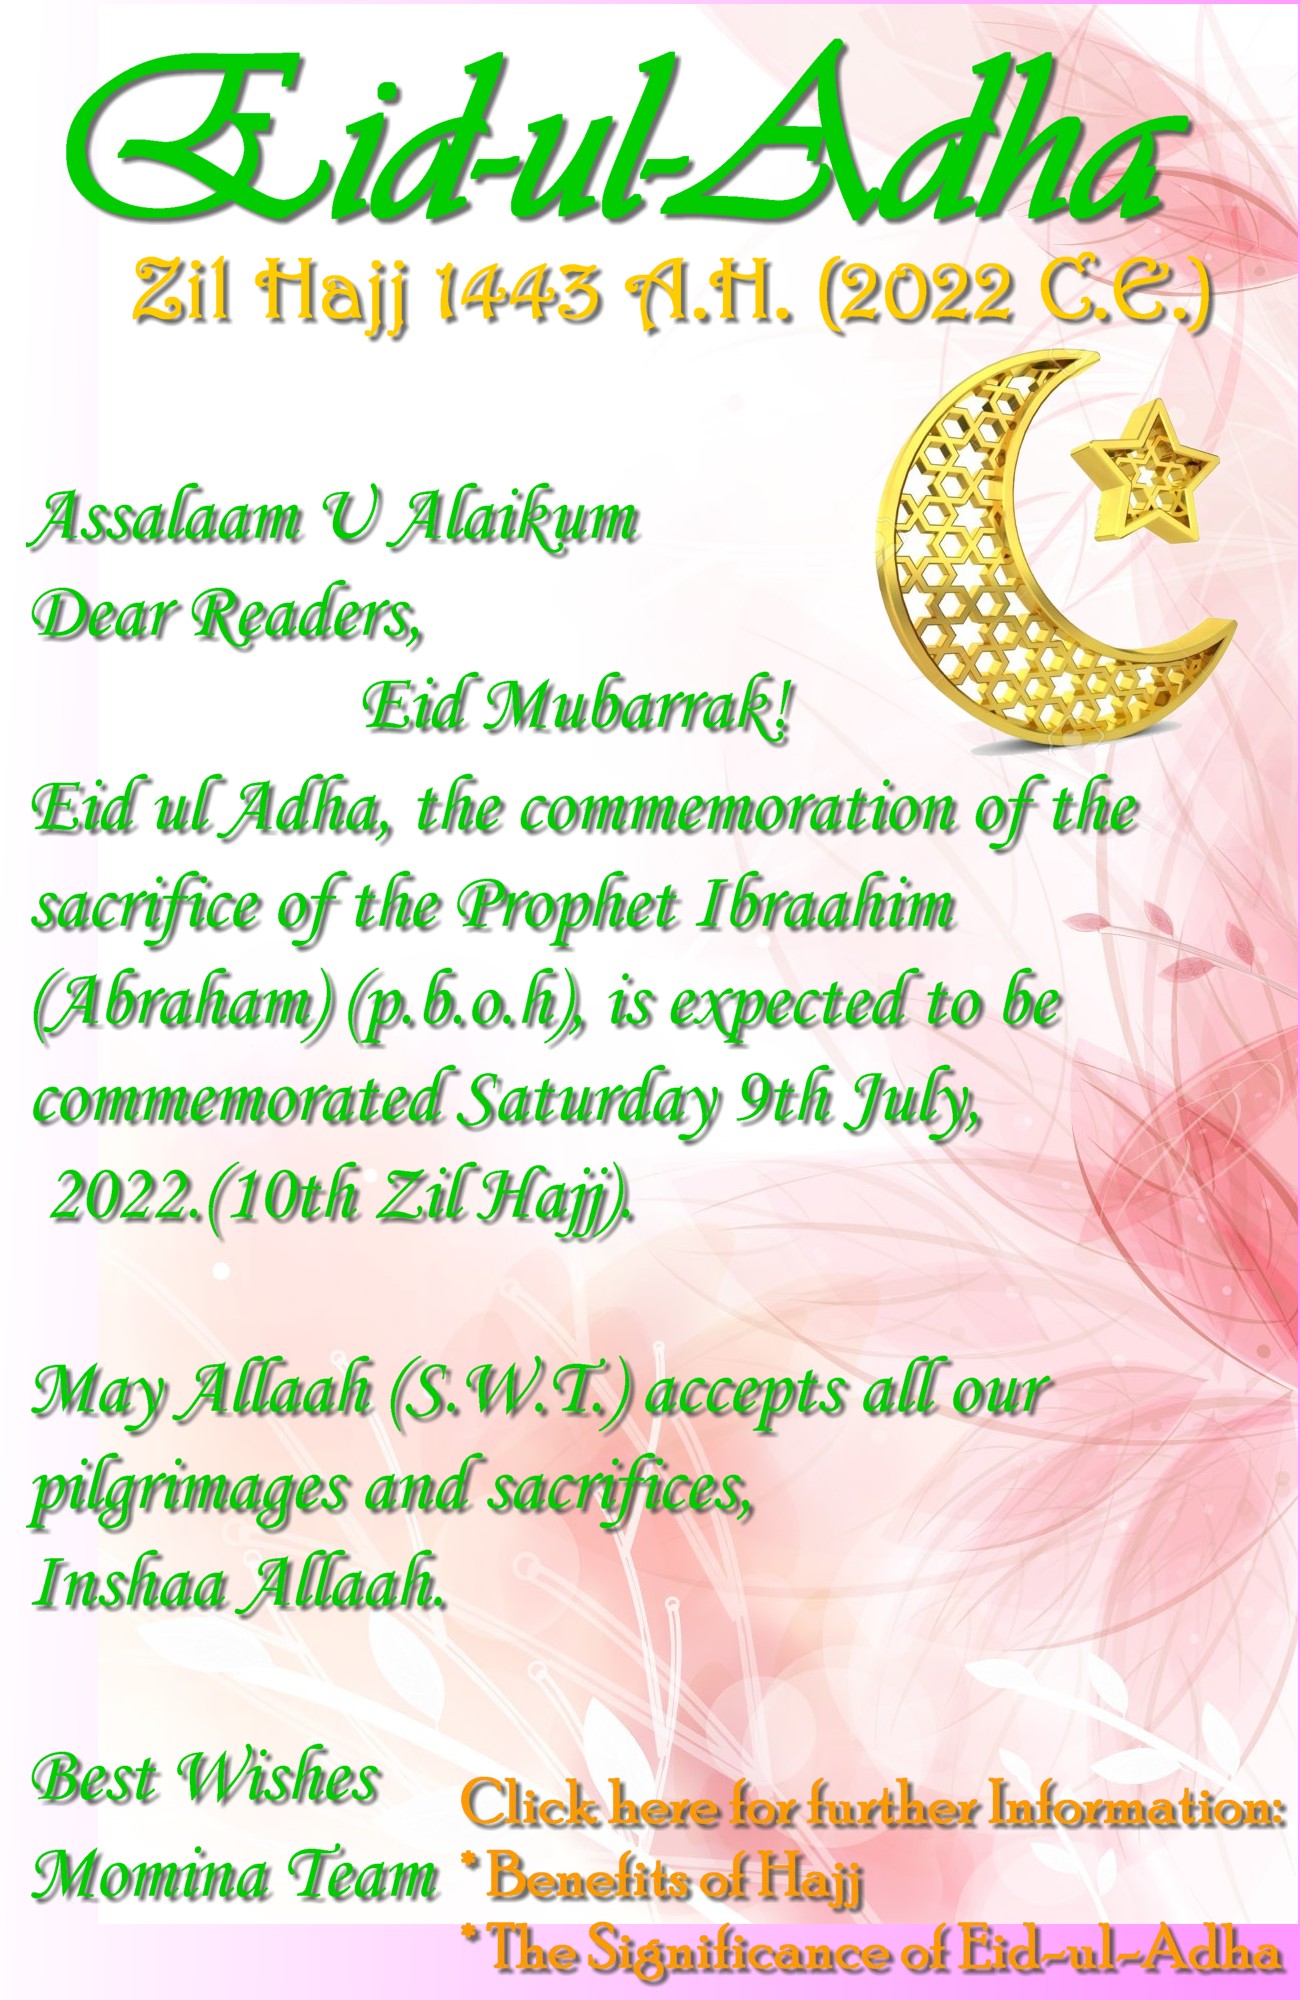 Click here for more information on Ramadaan and Eid.